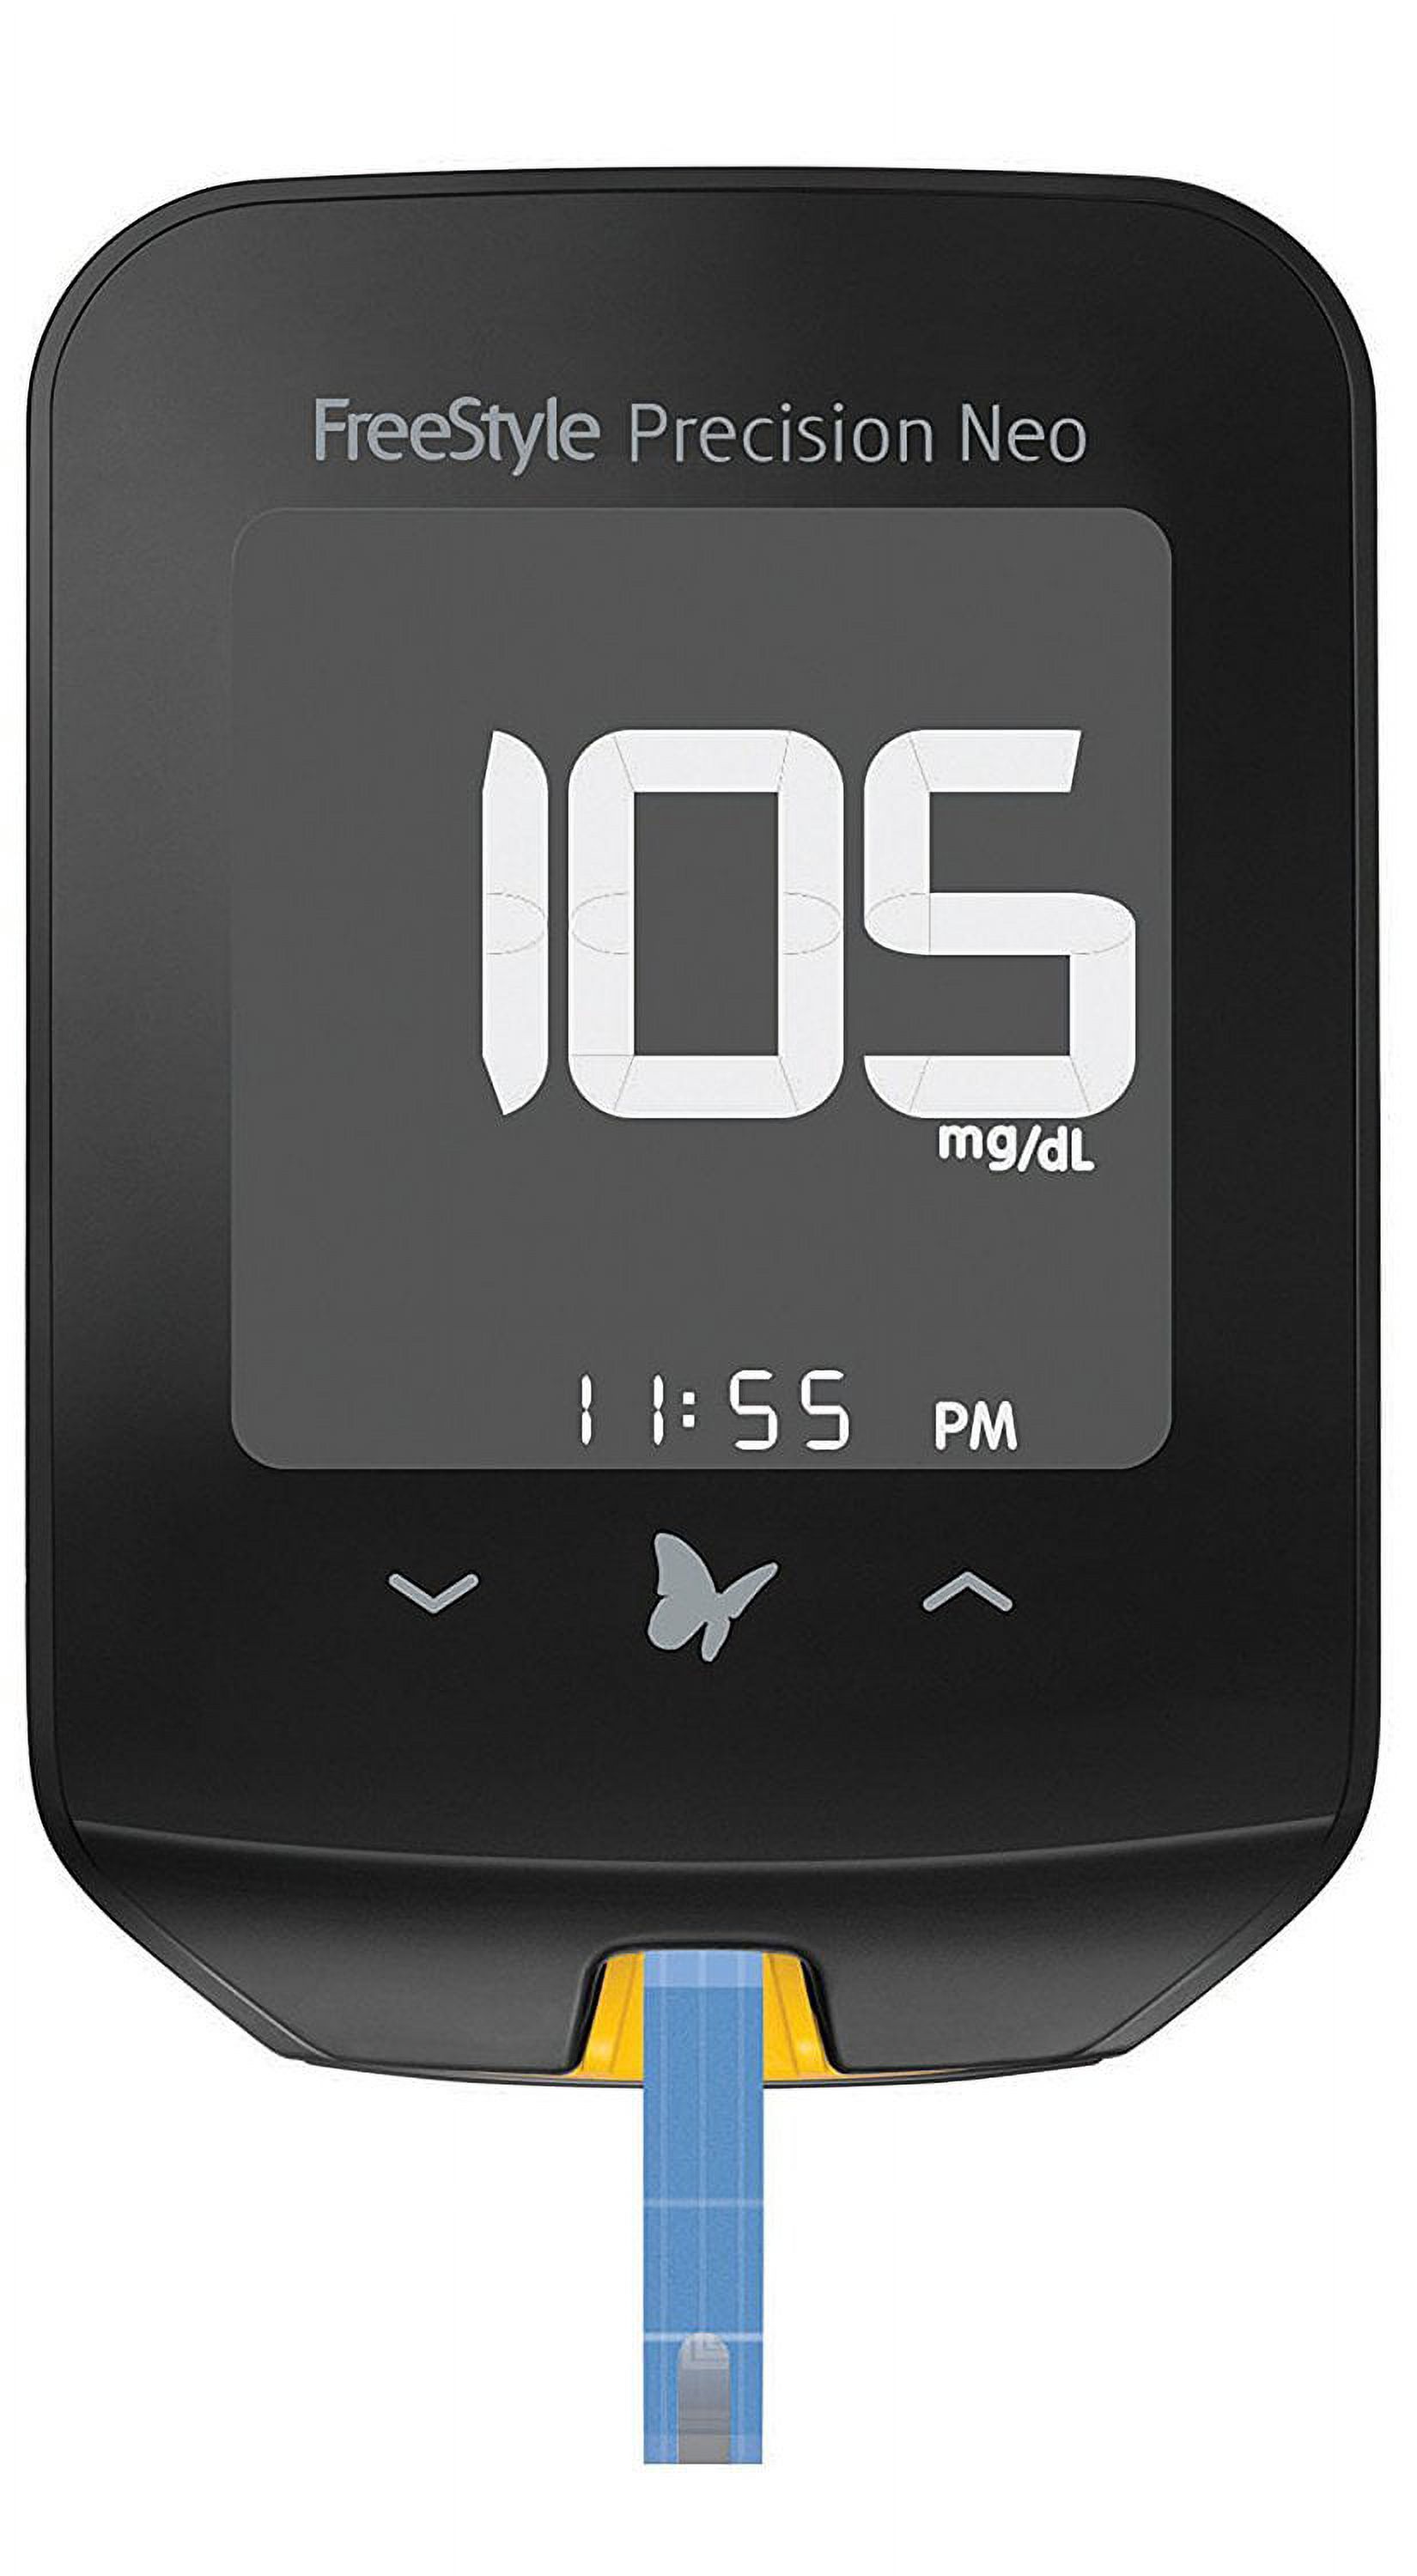 Freestyle Precision Neo Blood Glucose Monitoring System - image 3 of 4